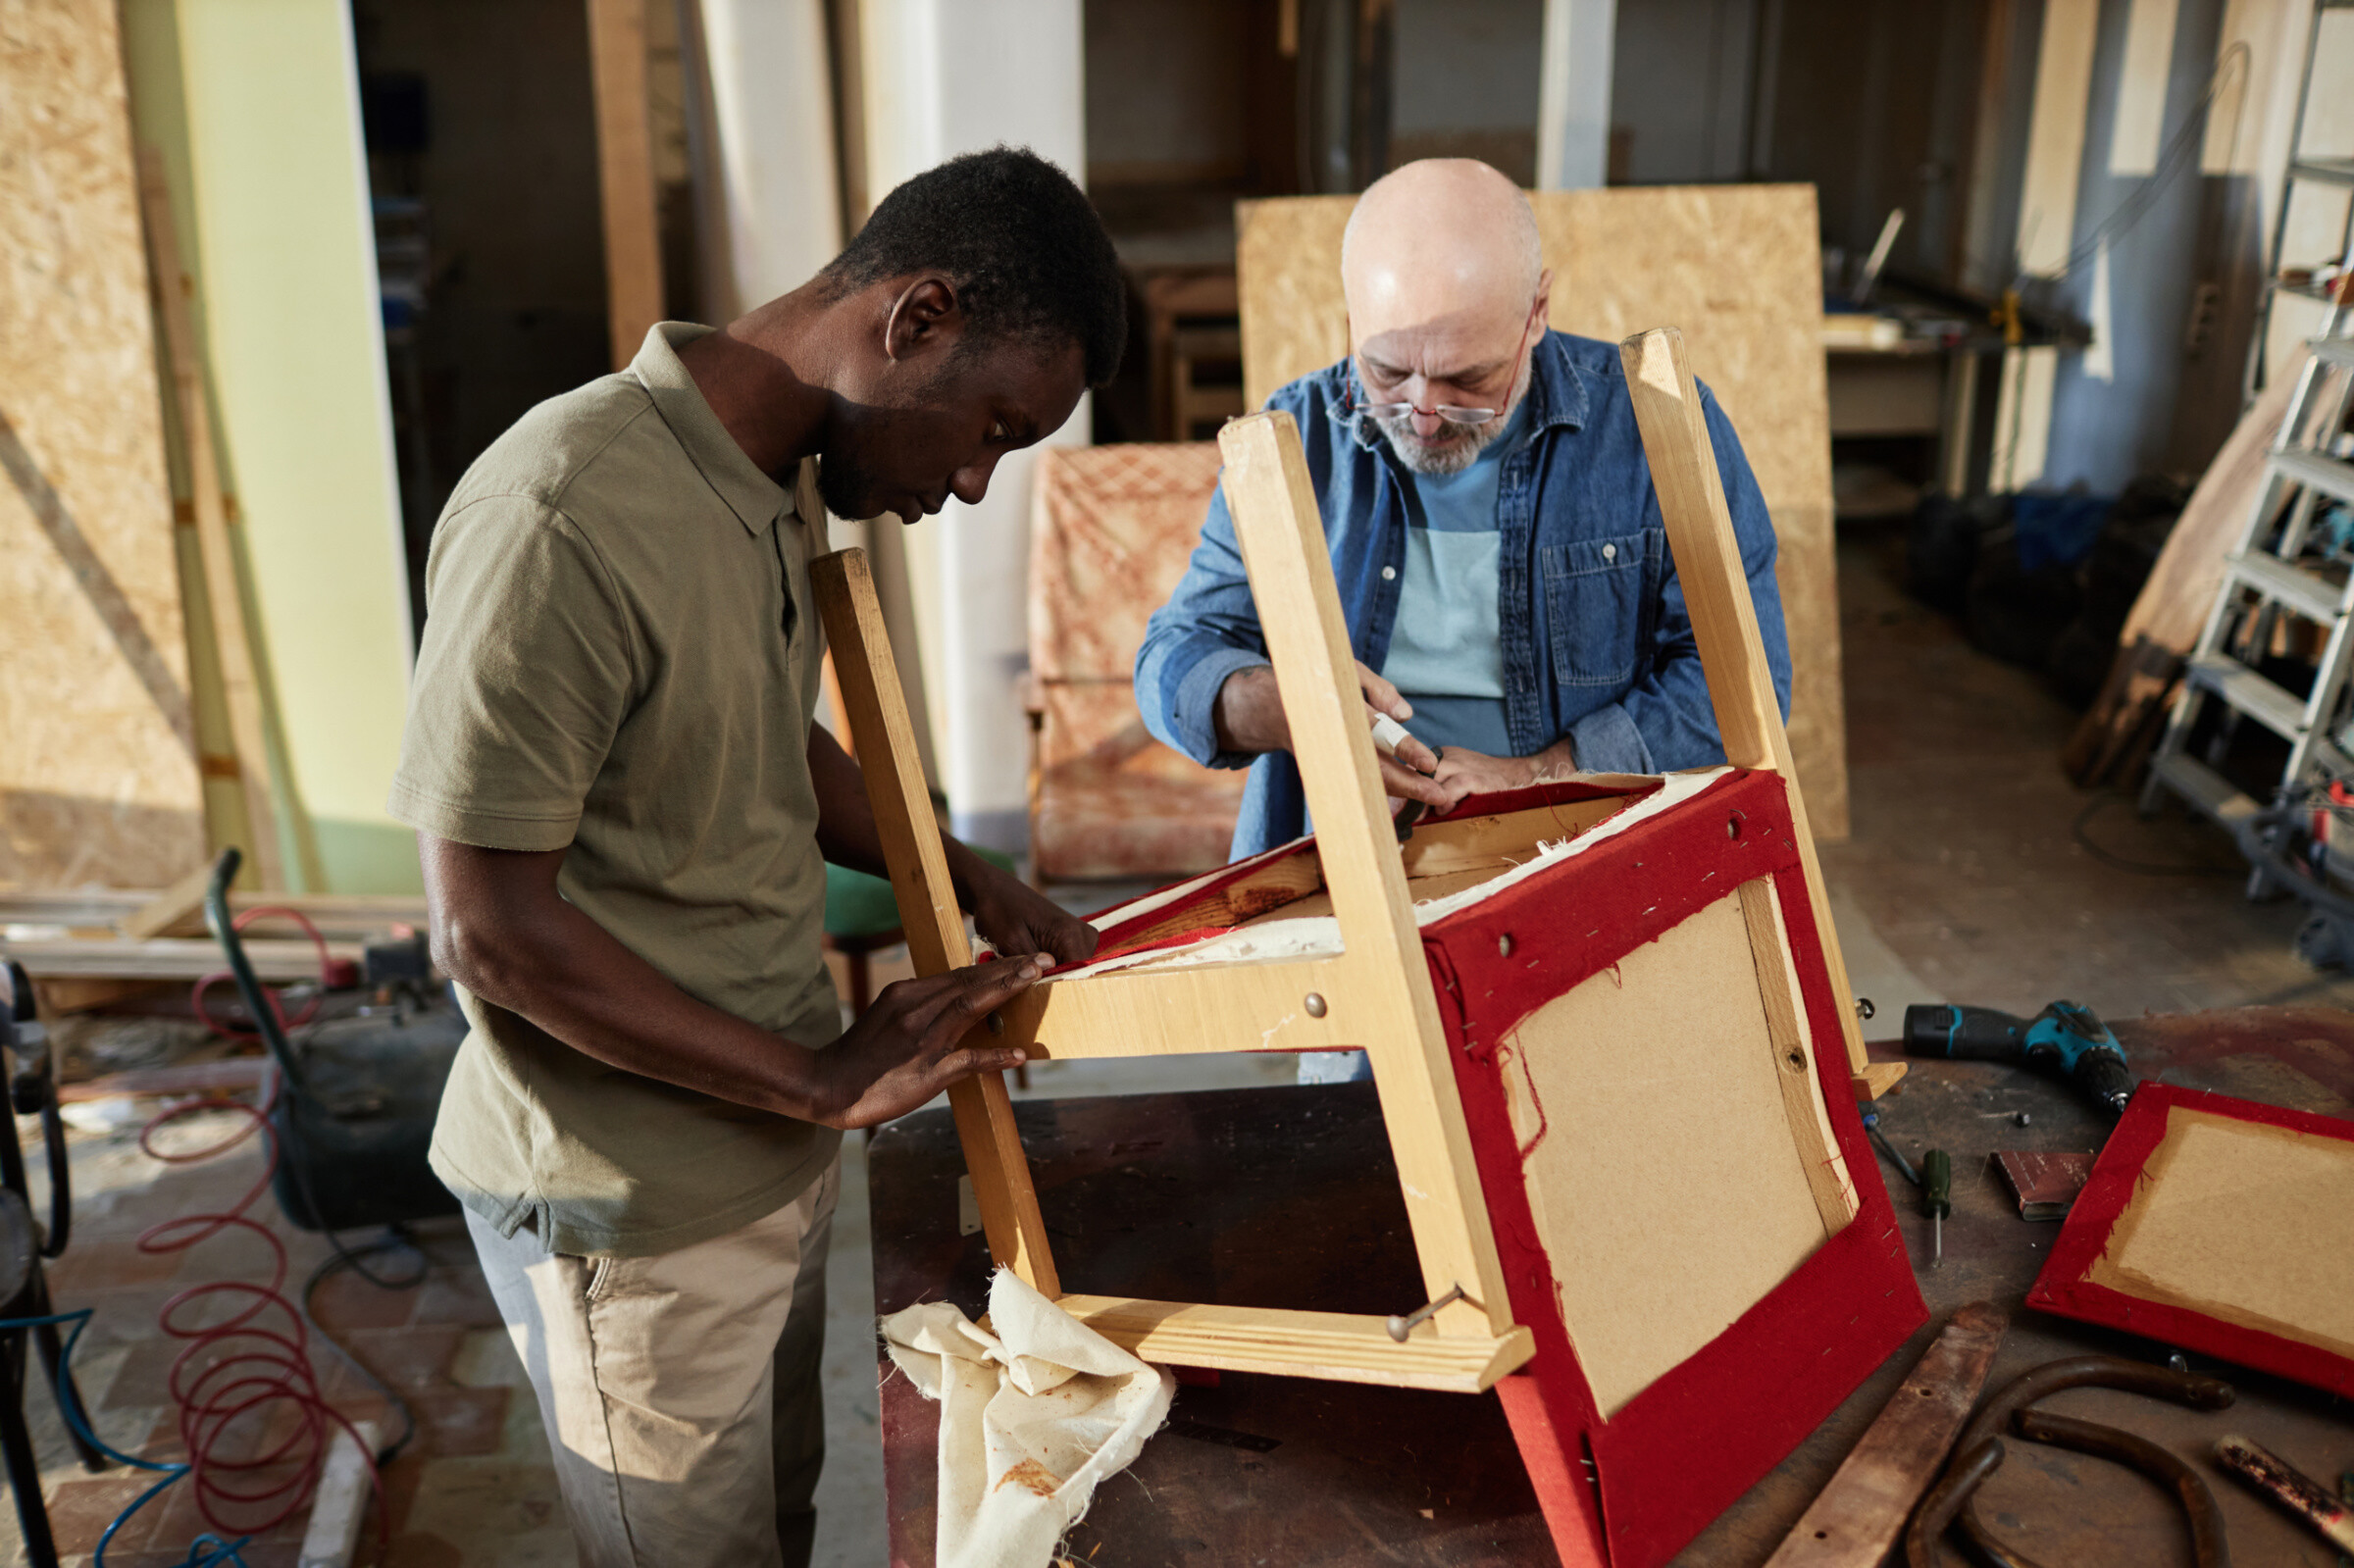 Two furniture repair experts working on a chair together in their workshop.